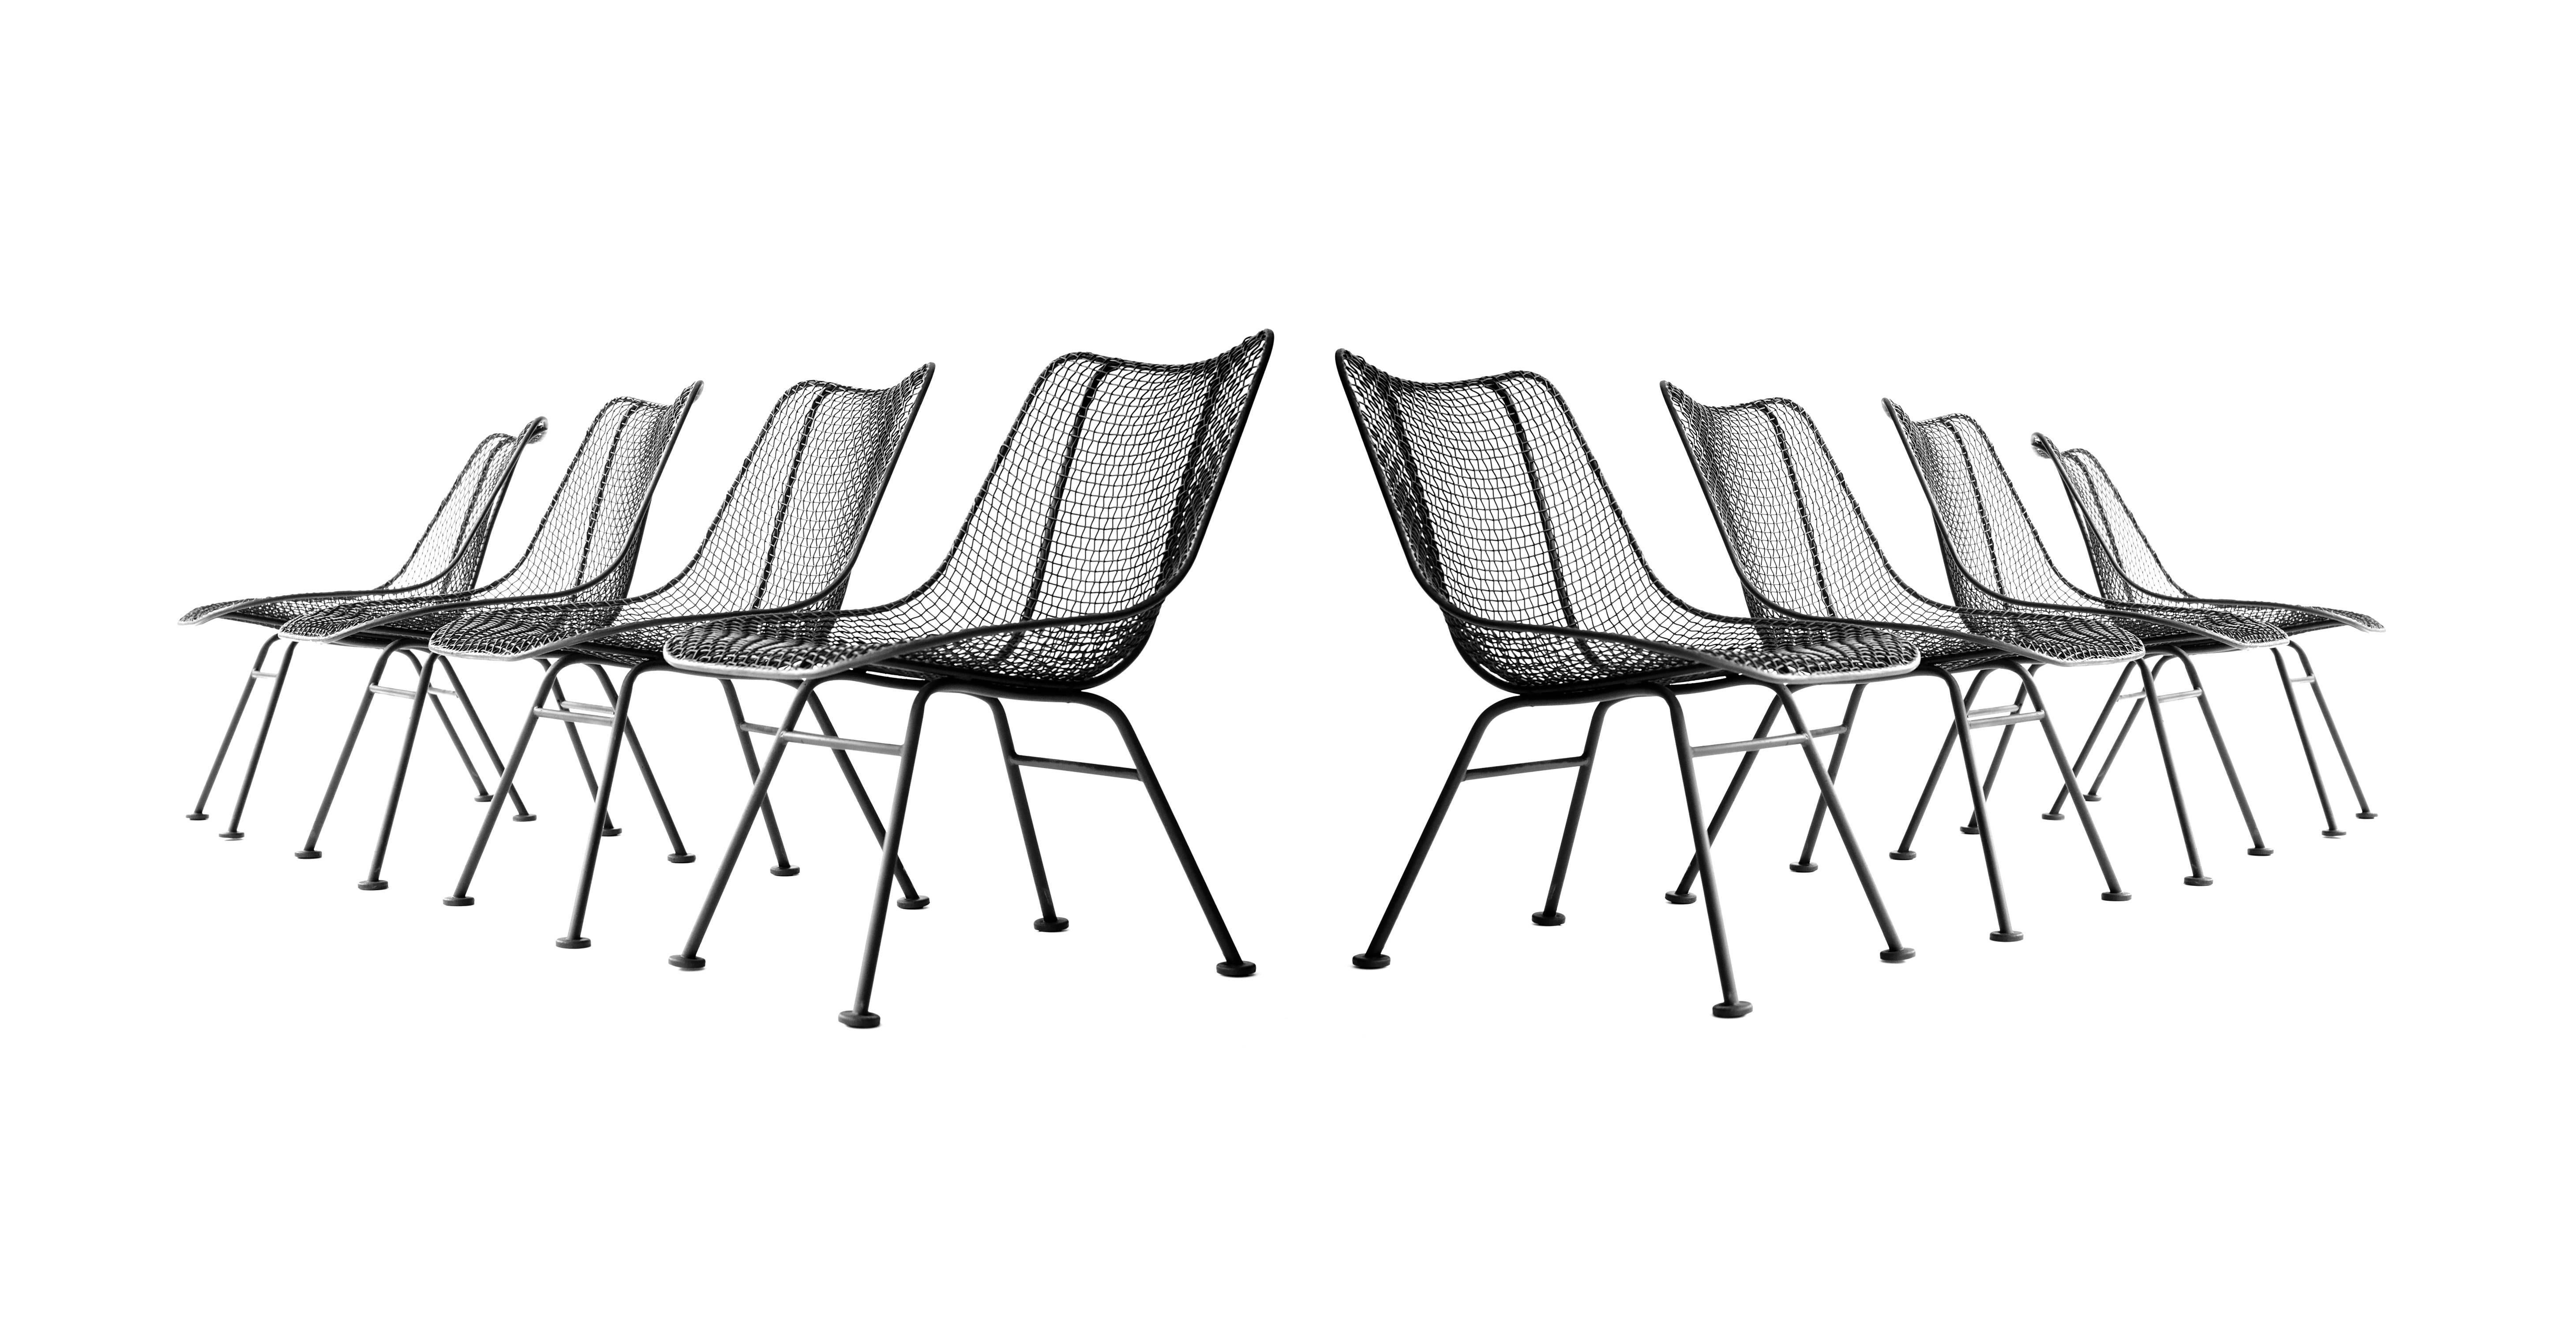 Russell Woodard Sculptura Group low scoop chairs. The chairs have been restored and are ready to install.
Please Note : that These chairs Are not Dining Chairs. They are lower and recline more than a dining chair.